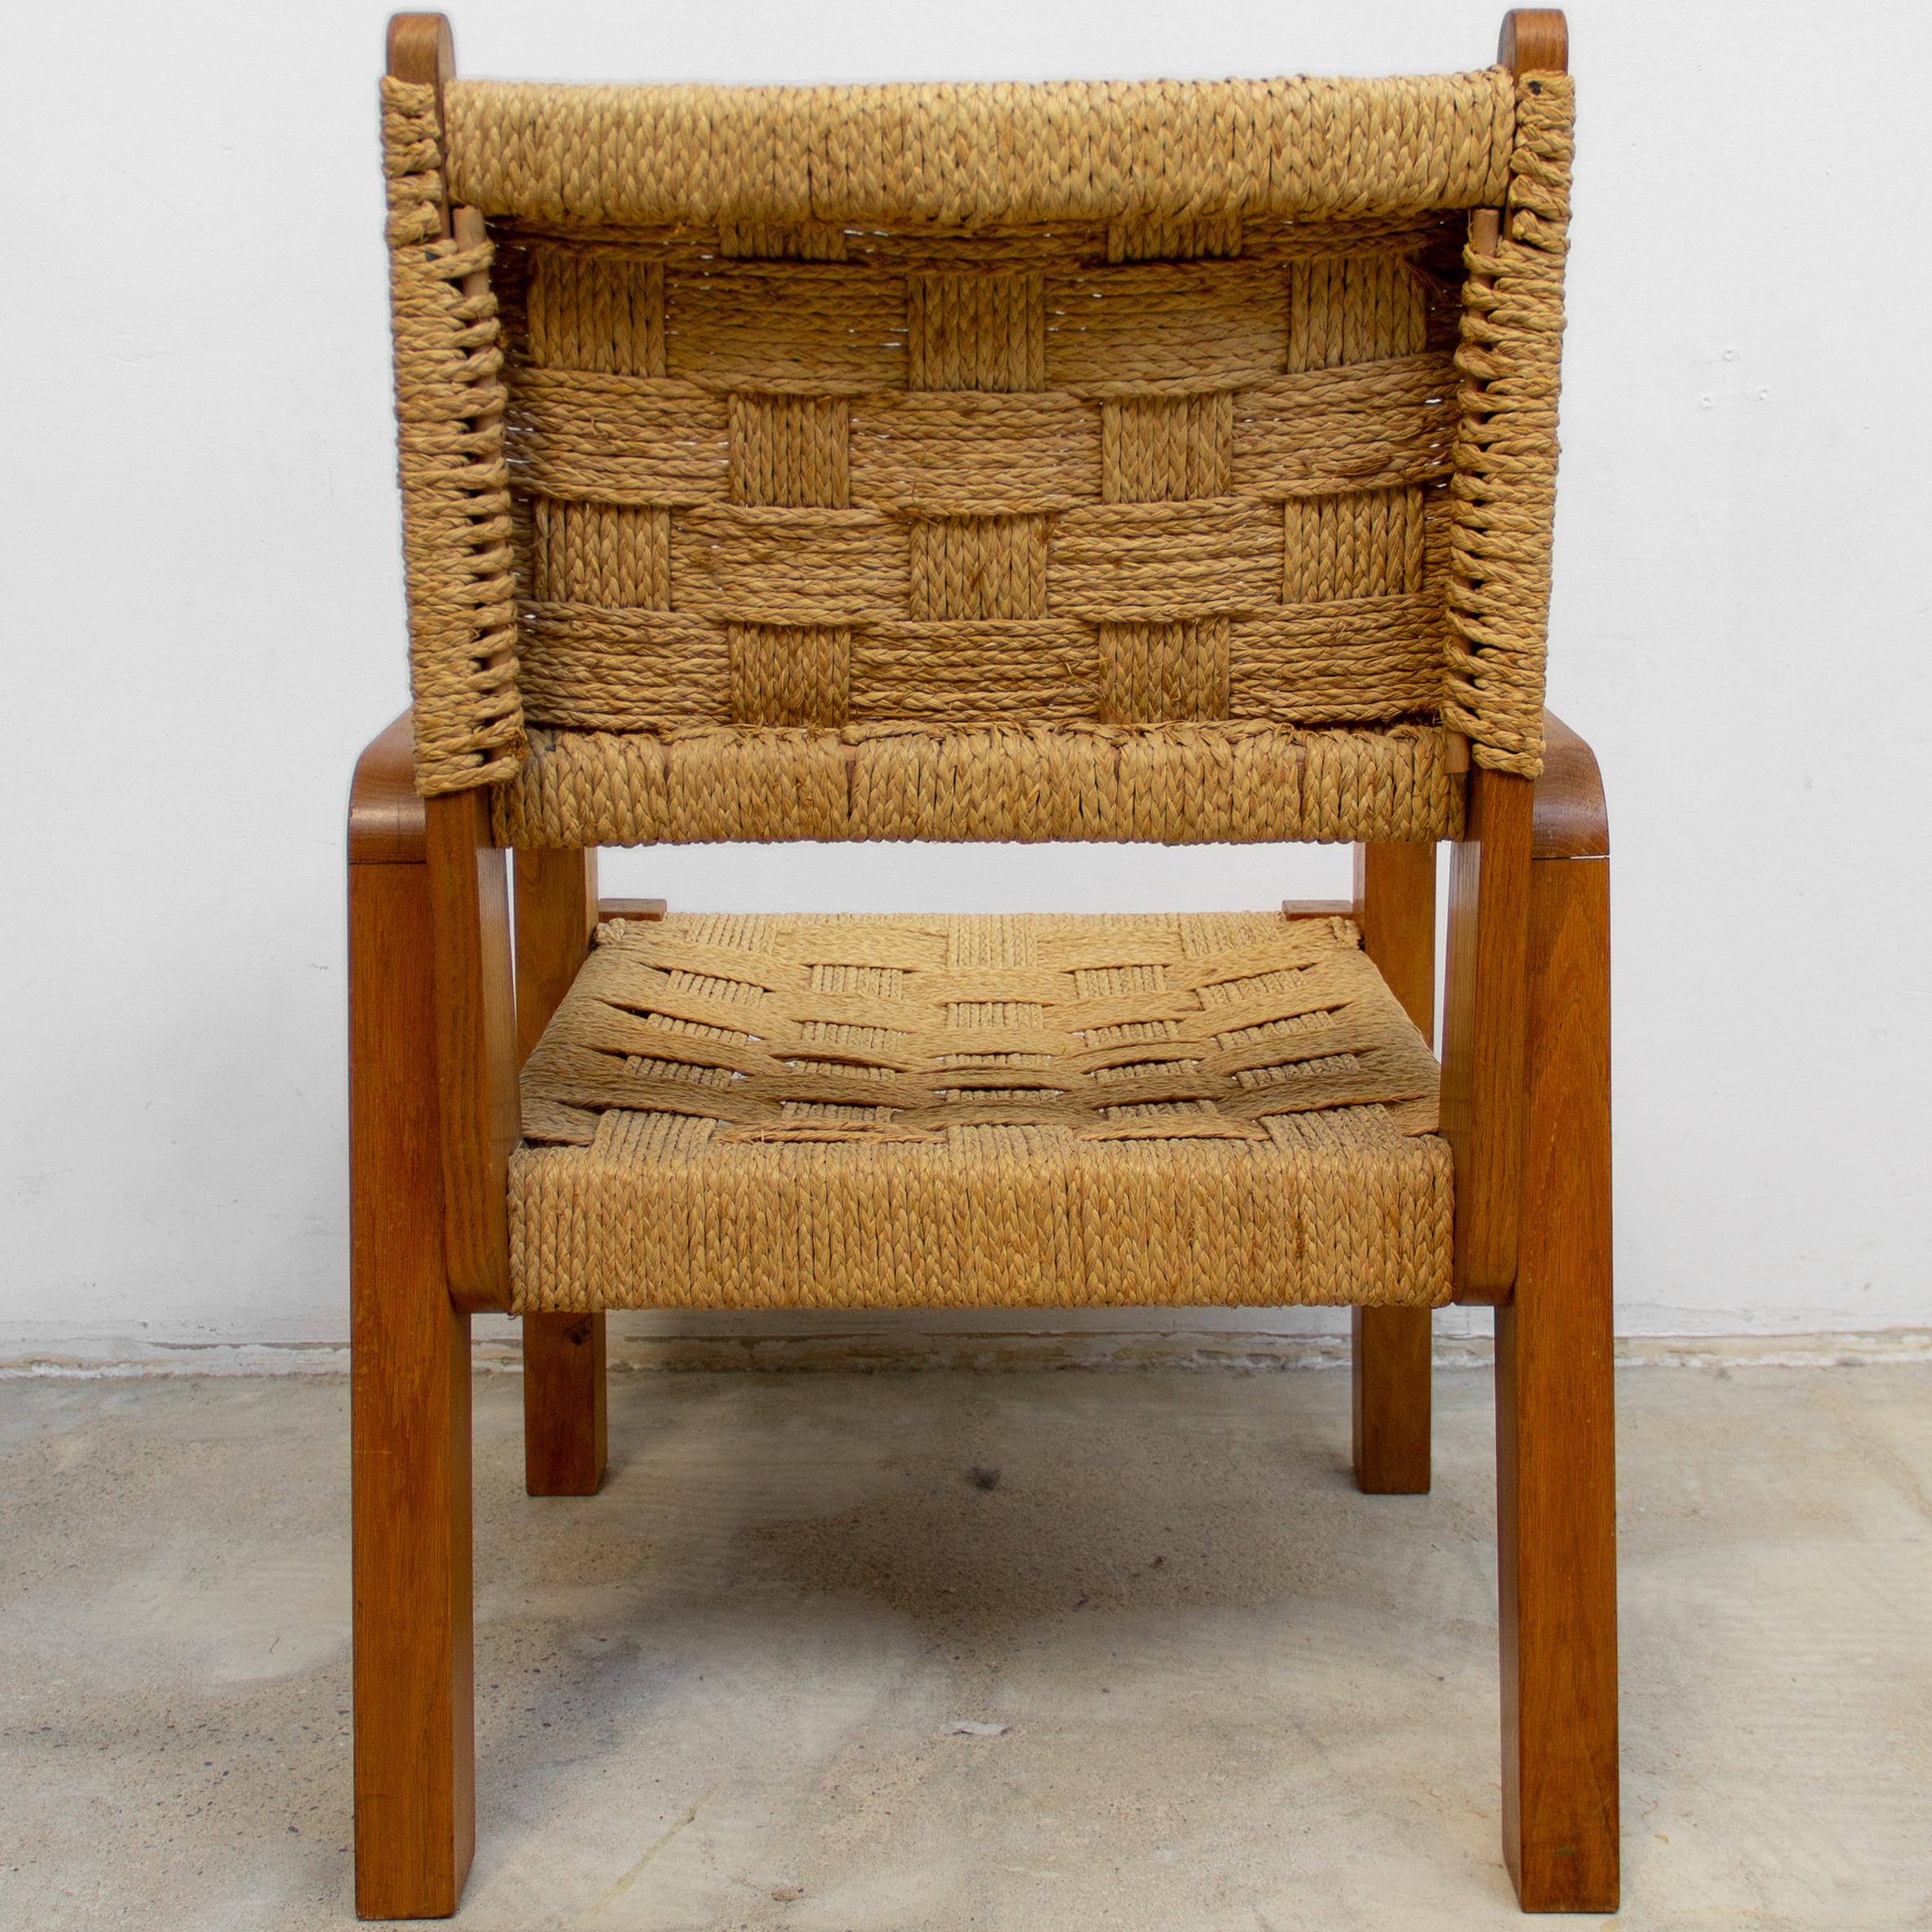 Hand-Woven Rare Modernist Bold Oakwood Lounge Chair and Handcrafted Raffia Woven Seating